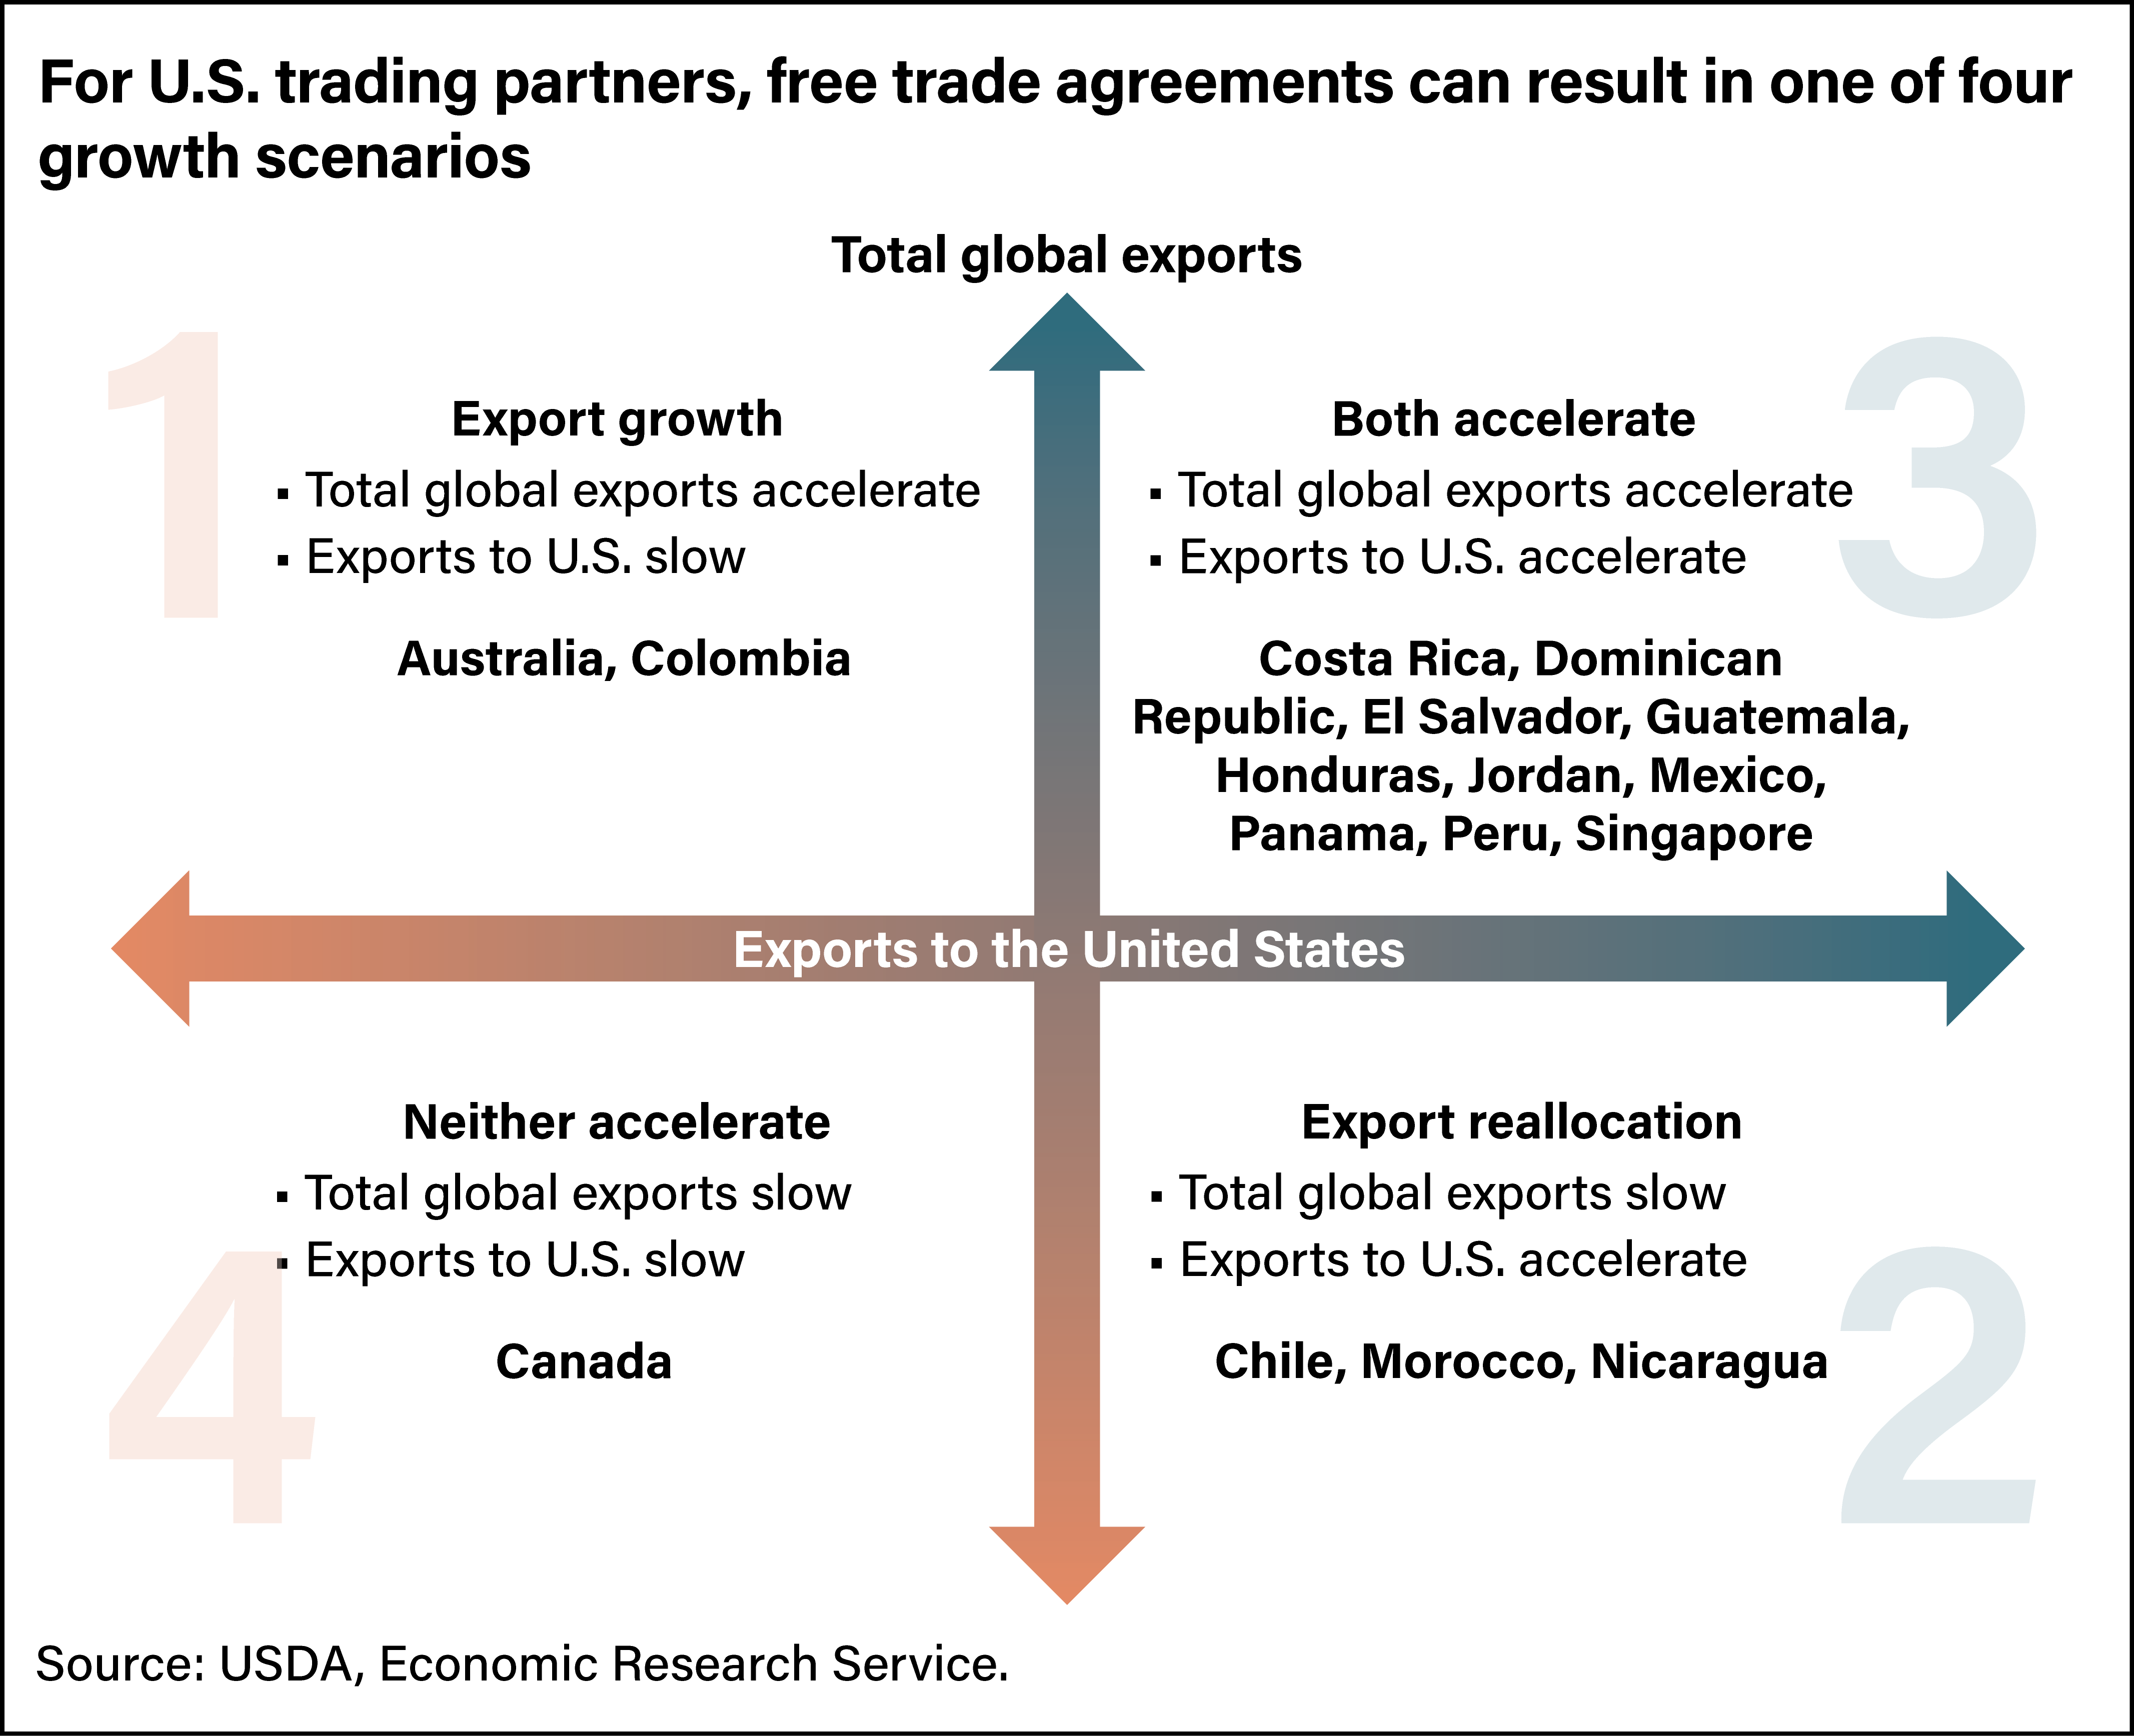 USDA ERS - Free Trade Agreements Mean Export Growth for Some